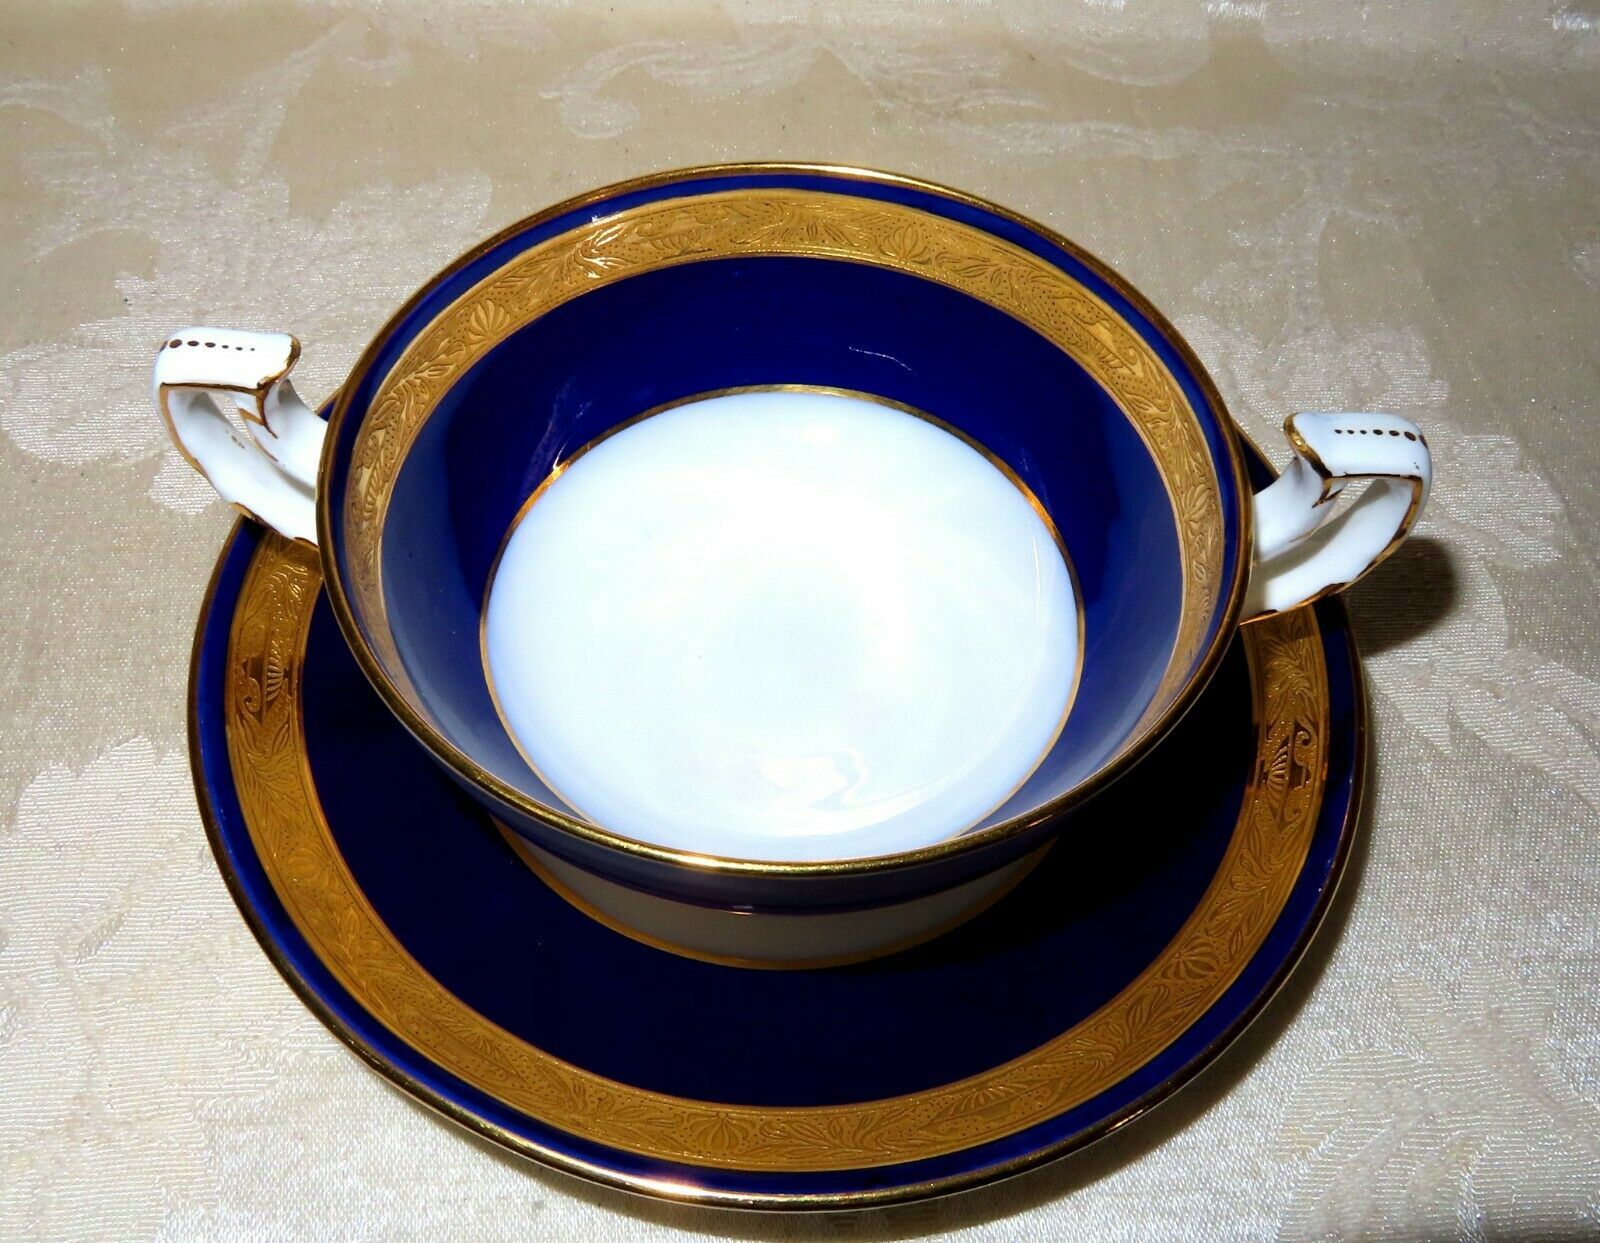 1800's Mintons Porcelain Cream Soup Bowl With Under Plate In Cobalt Blue & Gold